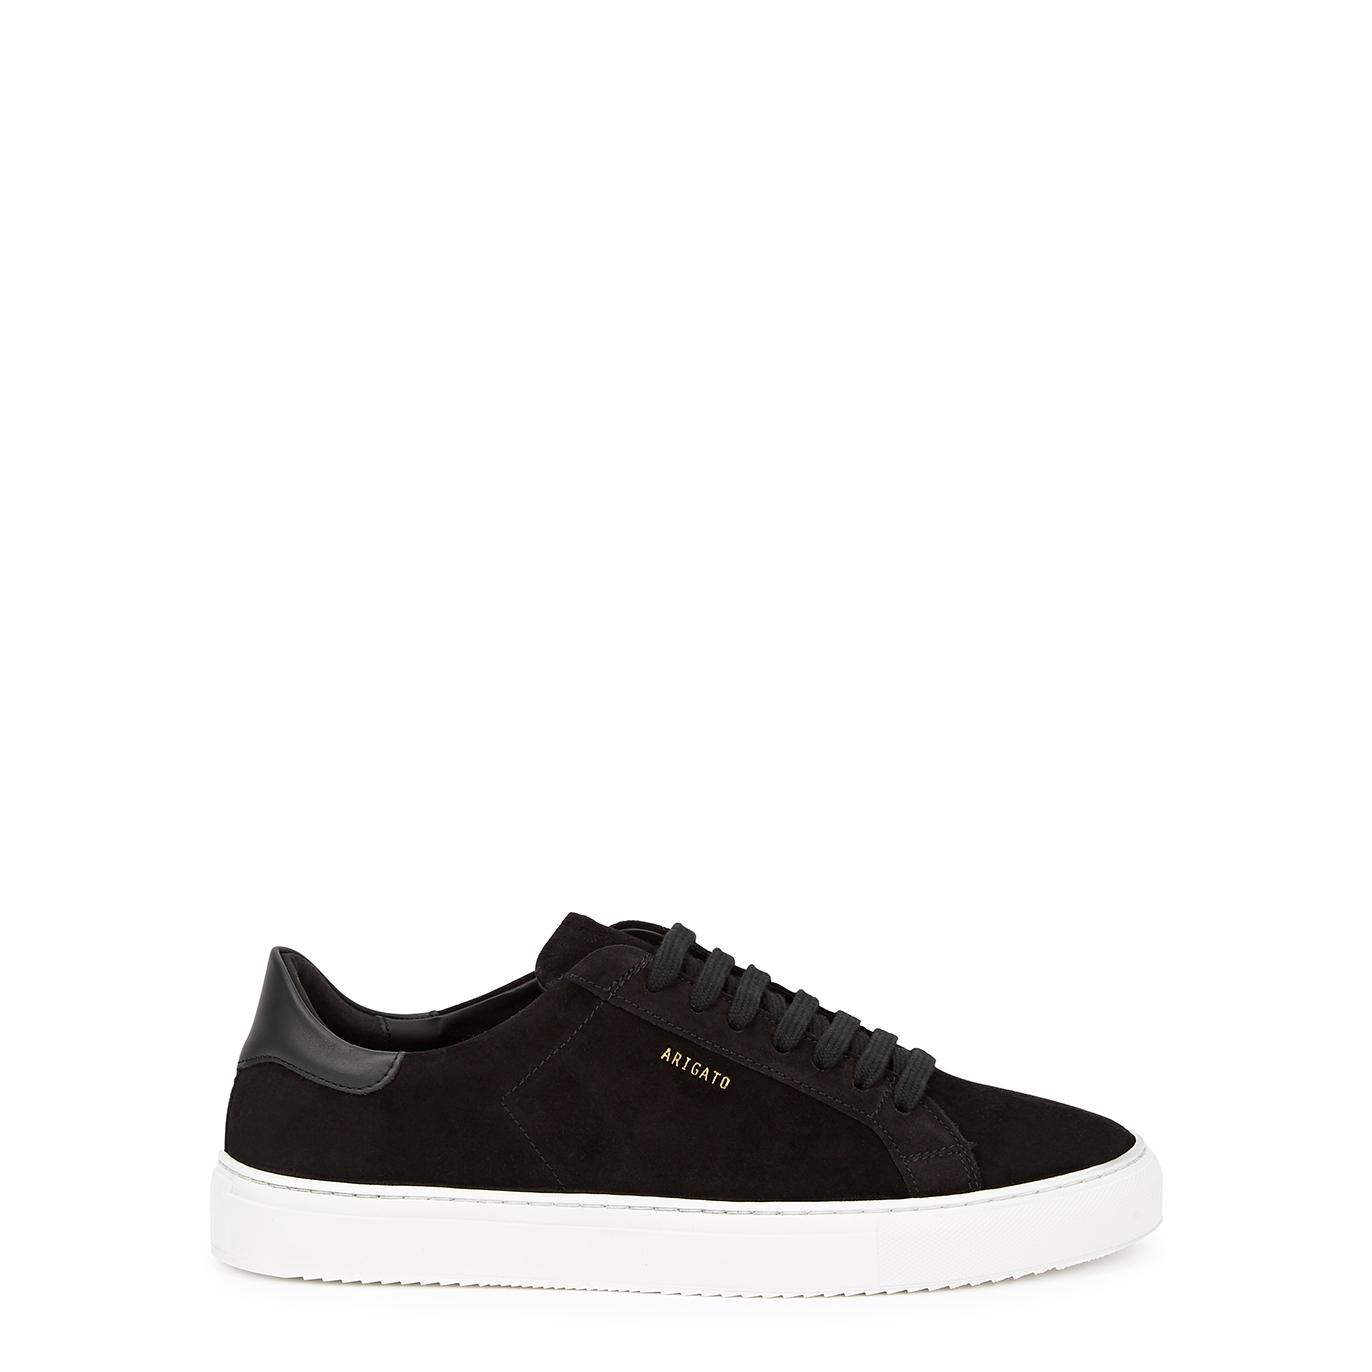 Axel Arigato Clean 90 Black Suede Sneakers, Sneakers, Gold Stamp - Black And White - 9